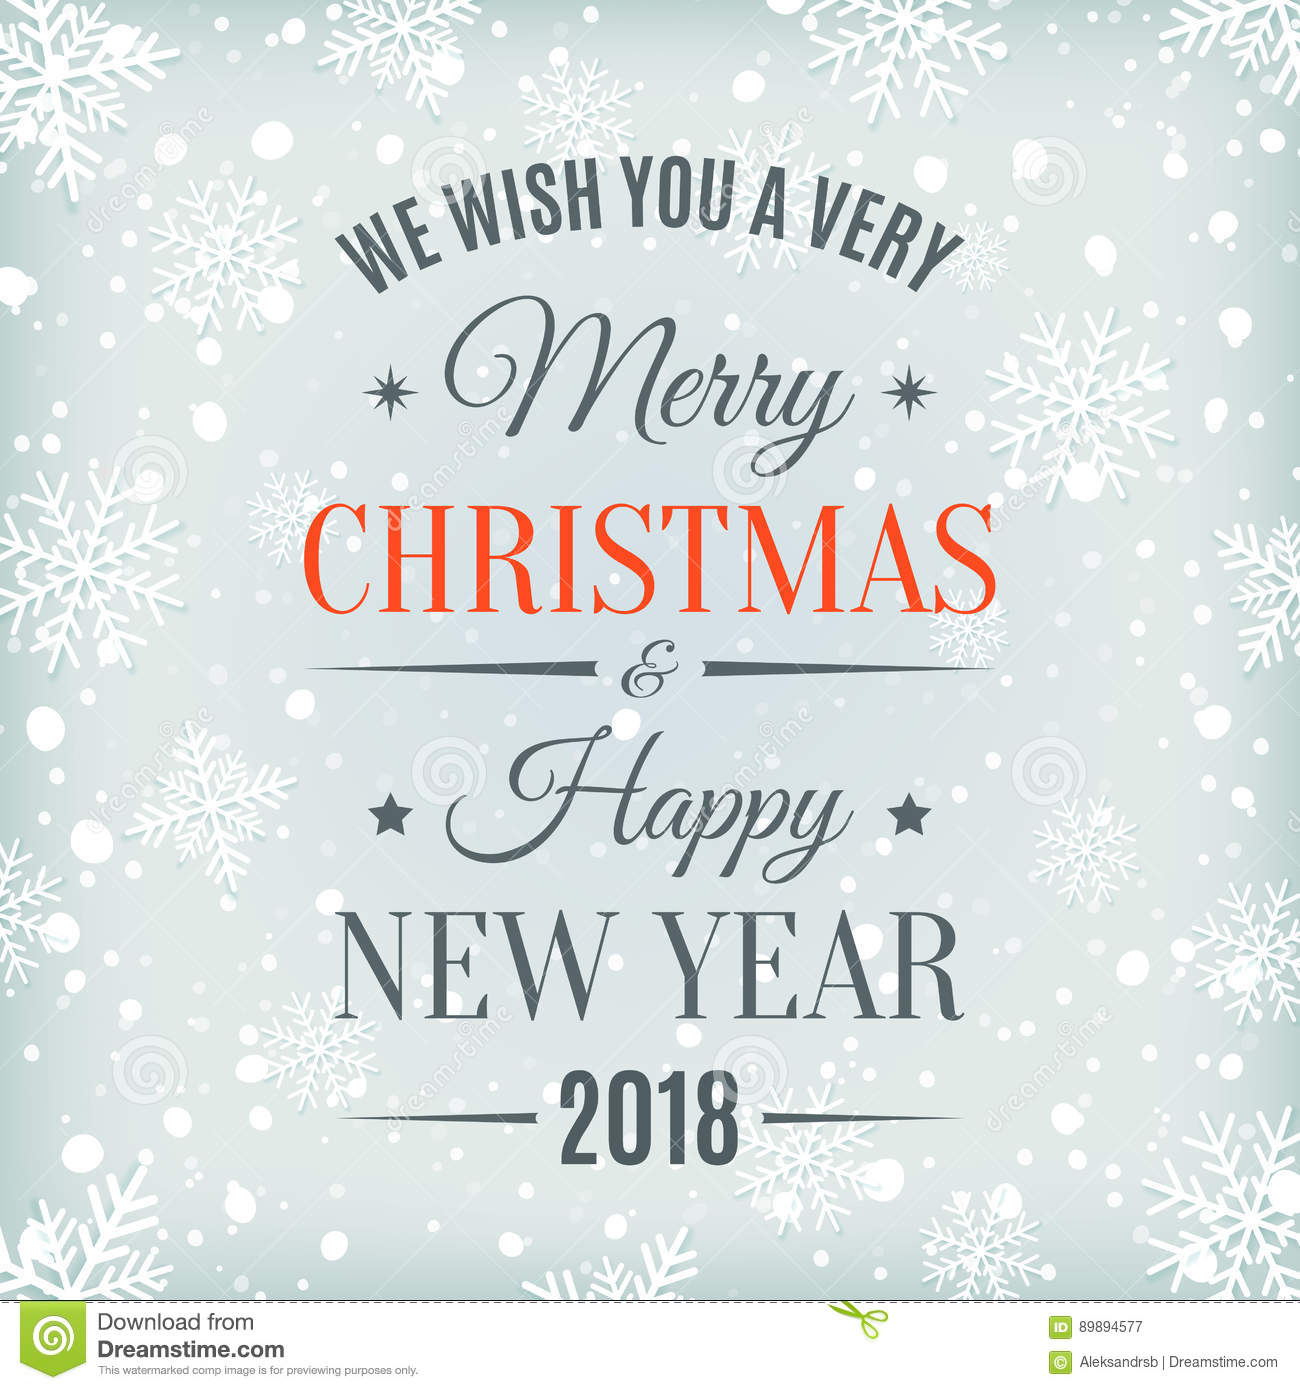 We Wish You A Very Merry Christmas Happy New Year 18